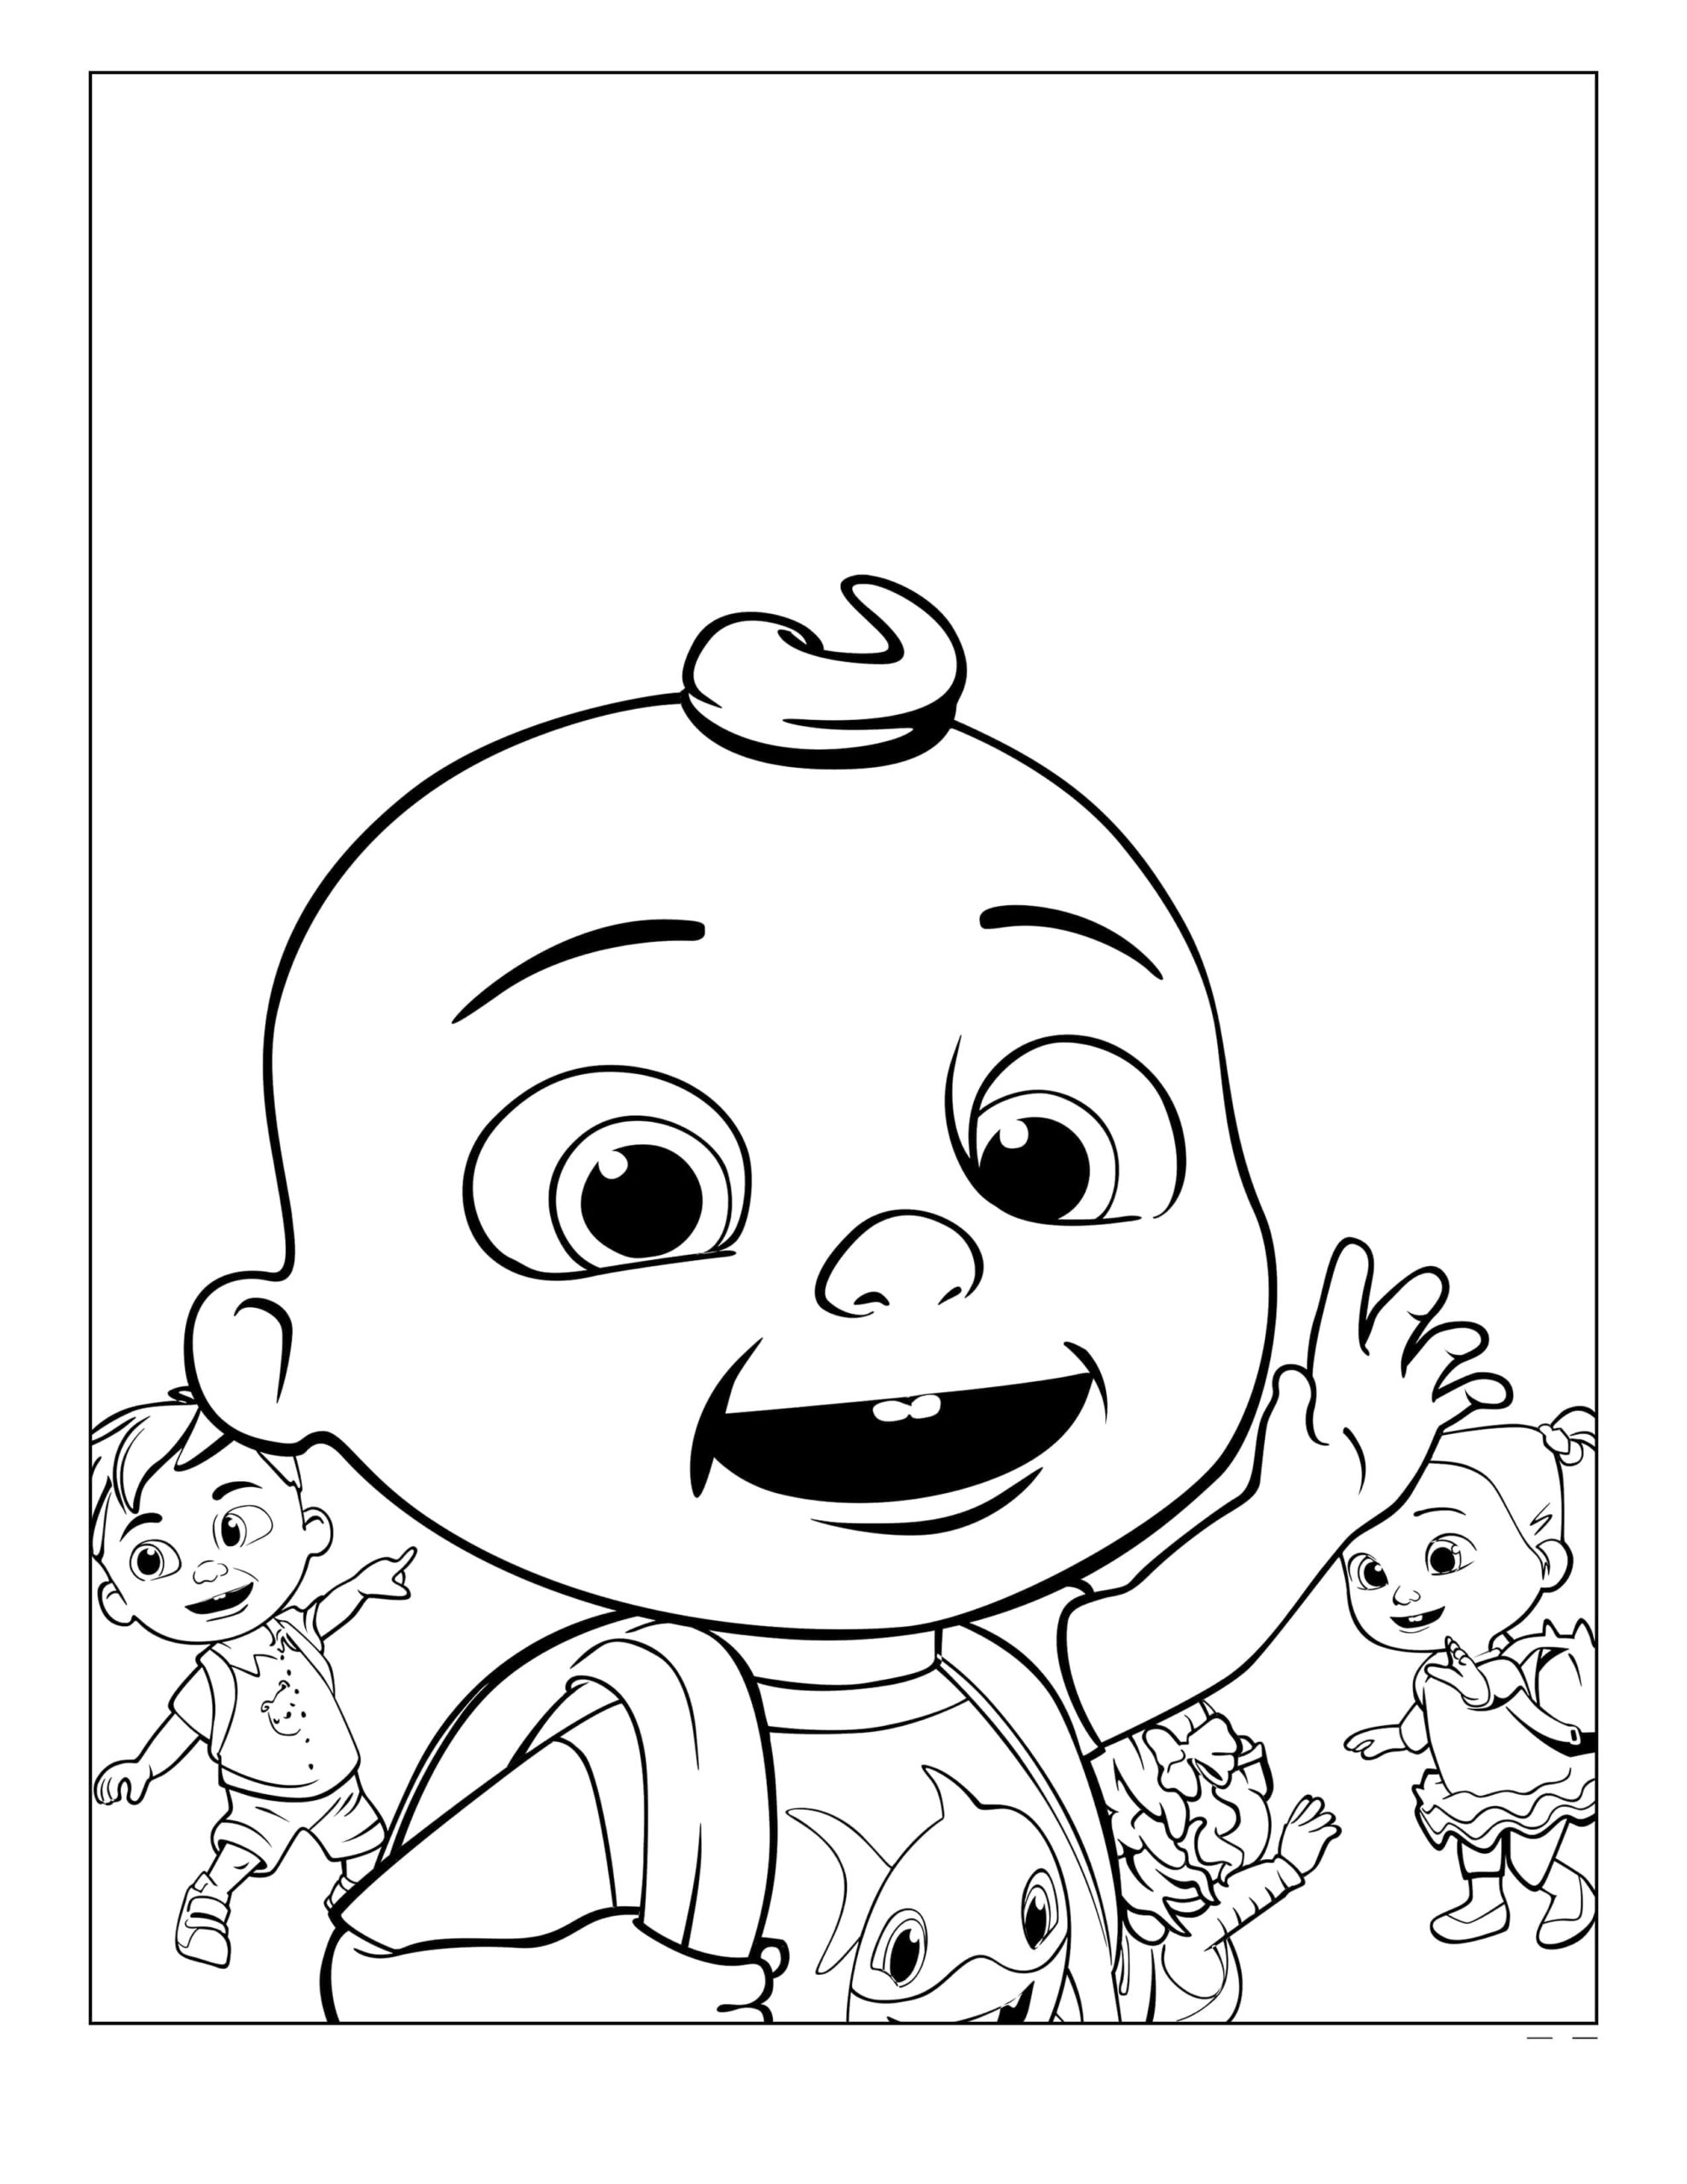 Free Printable Colouring Sheets / Coloring Pages 20